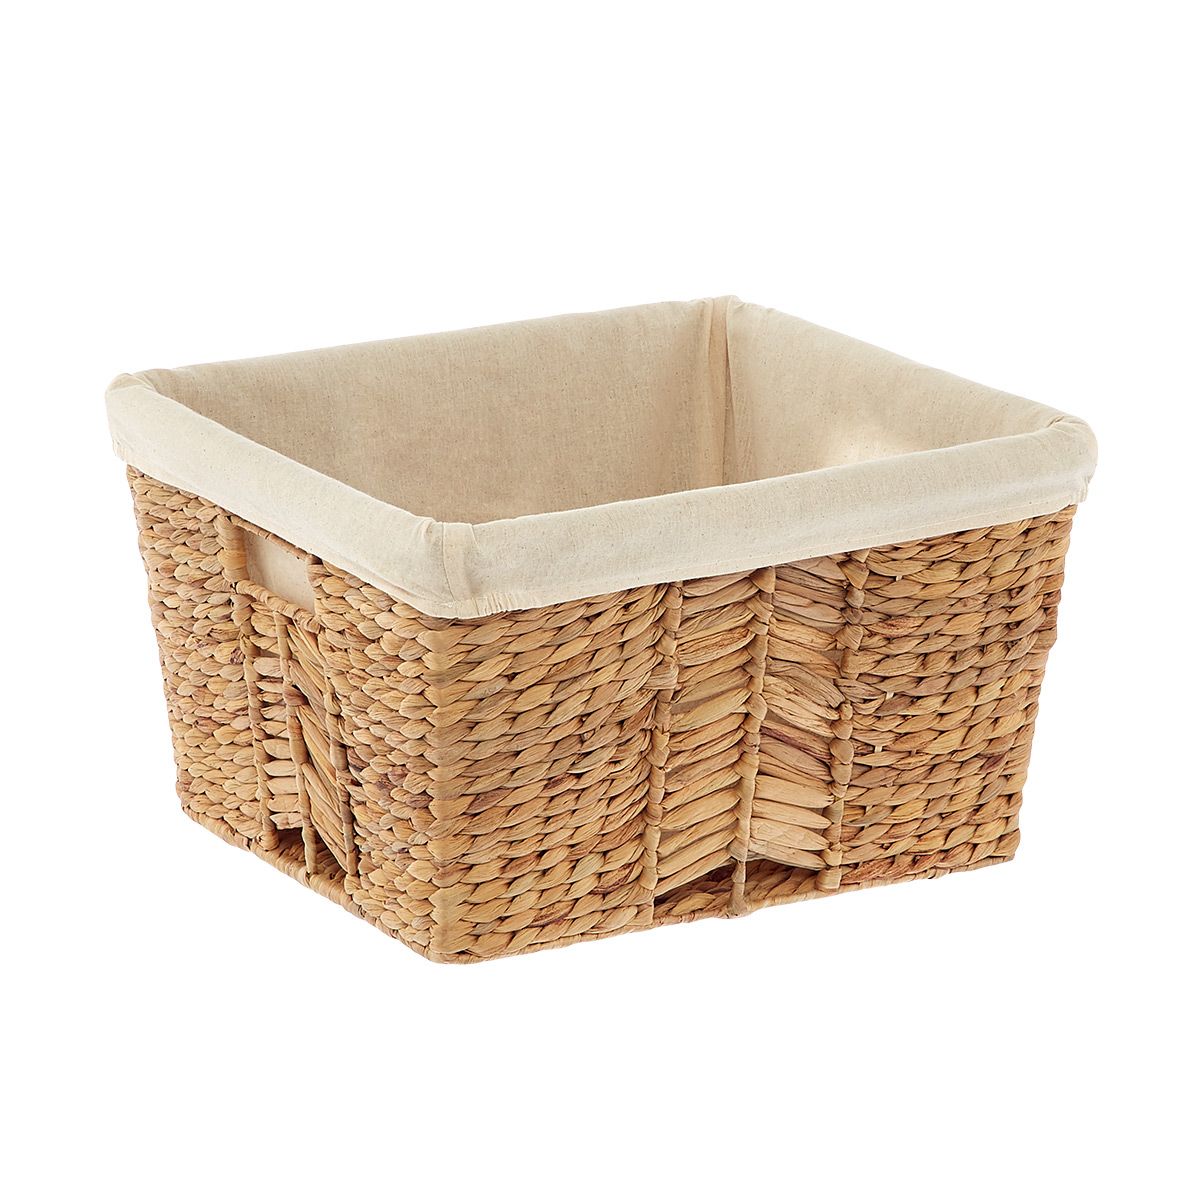 Medium Mixed Water Hyacinth Weave Bin Natural | The Container Store